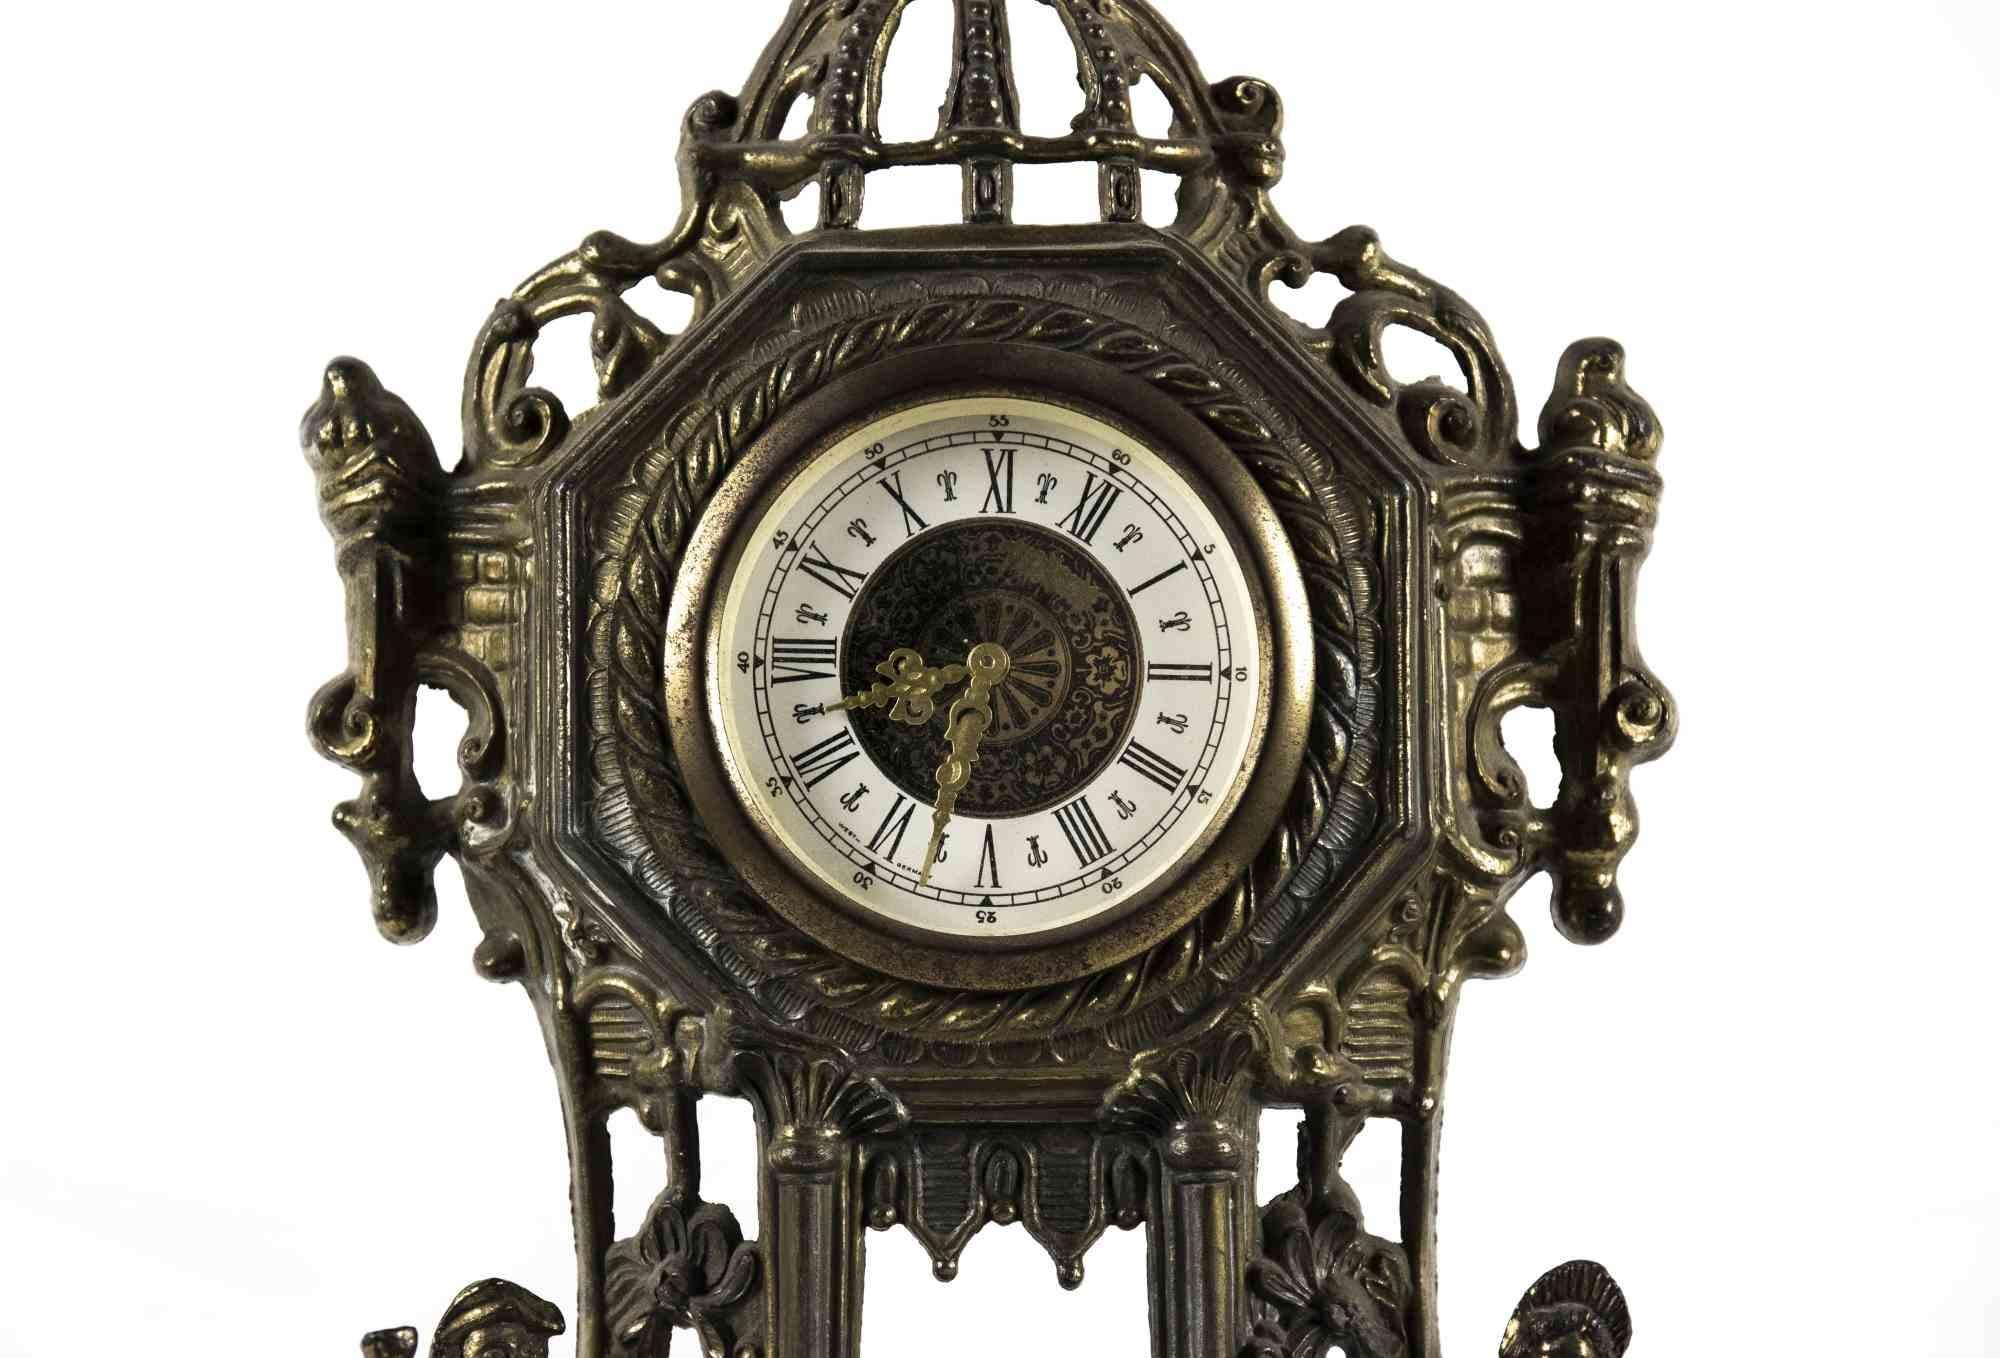 clocks from the early 1900s